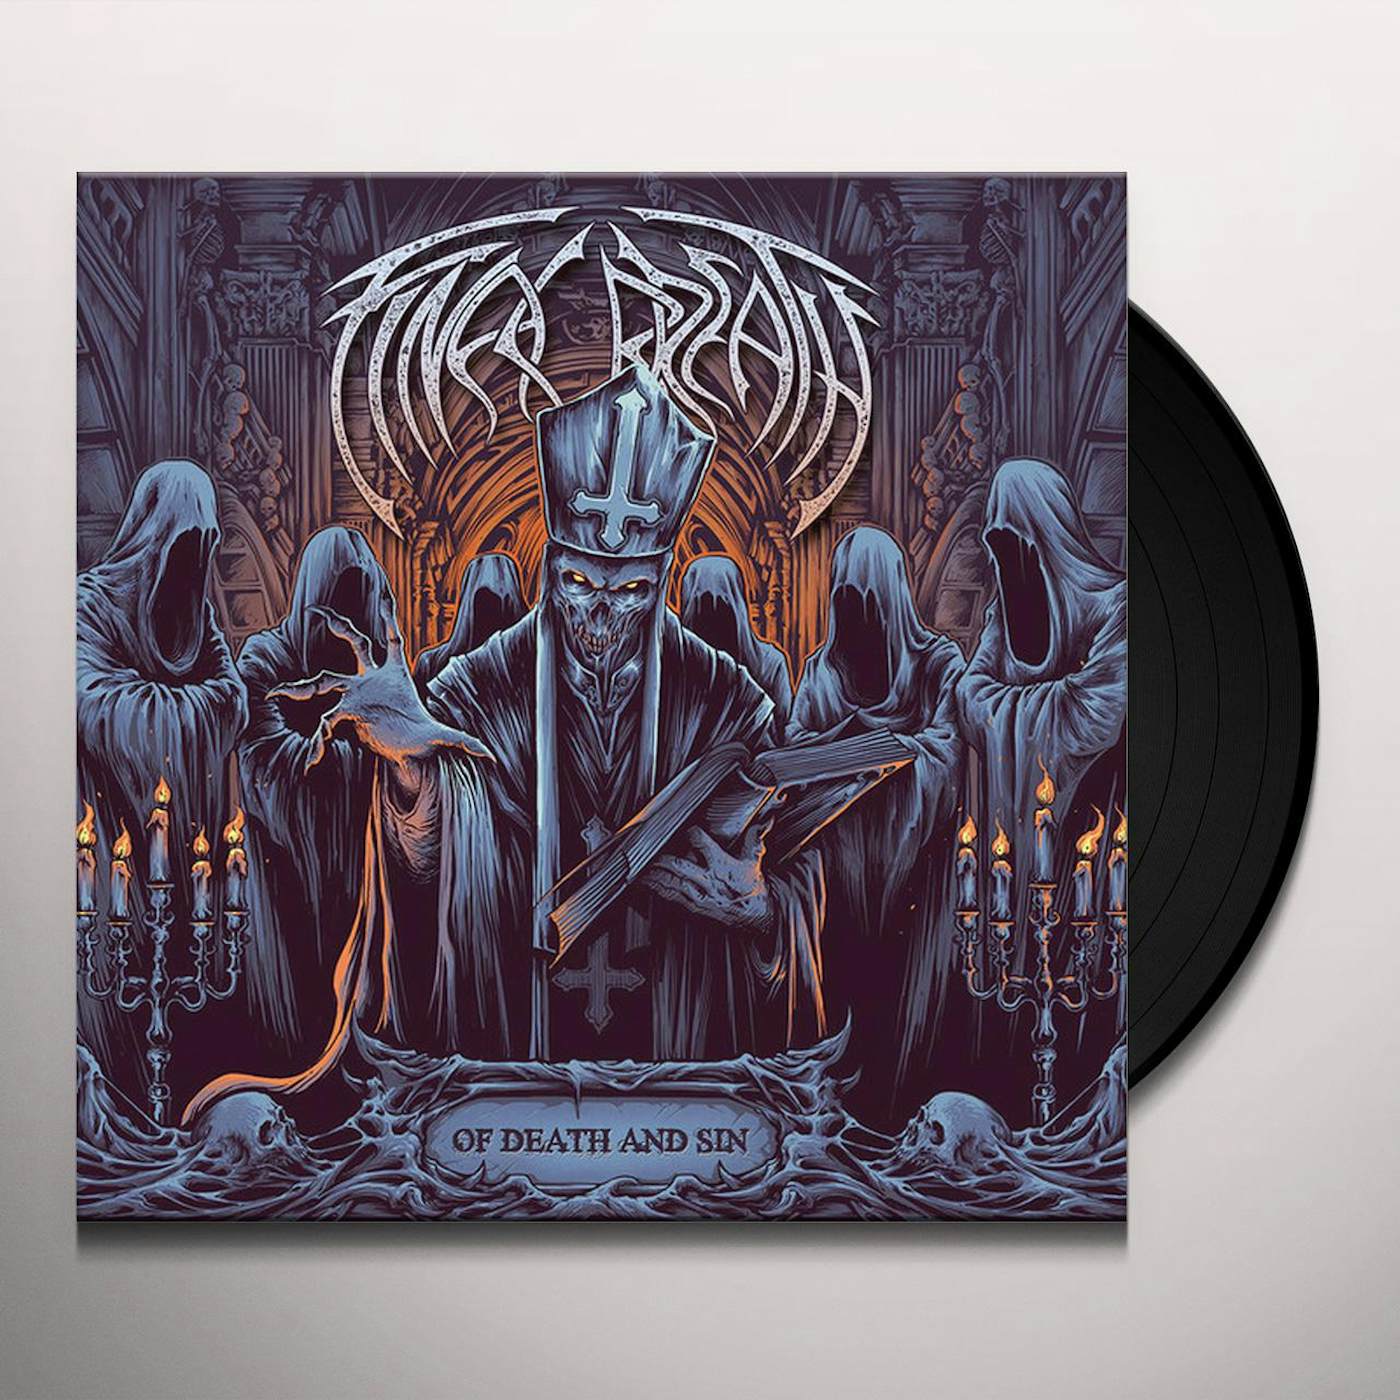 Final Breath Of Death And Sin Vinyl Record